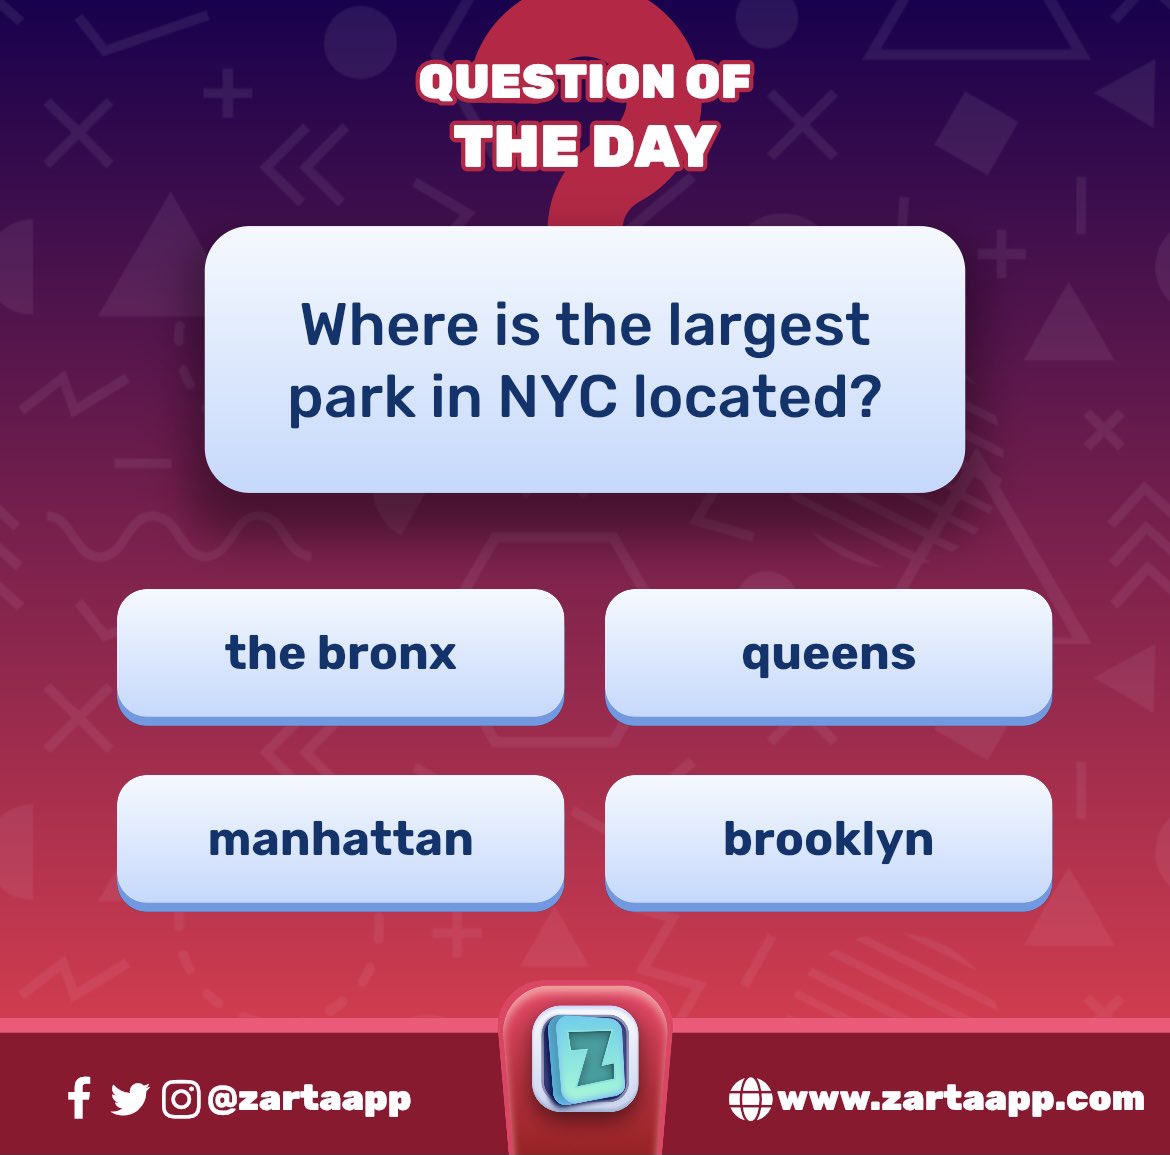 #QuestionOfTheDay! Where is it located and a bonus Q: what is the name of it?? Reply to this tweet if you know the answer! #zarta #zartachallenge #game #gaming #gamingcommunity #gaminglife #question #questionoftheday #trivia #triviagame #nyc #largestpark #nyctrivia #parktrivia